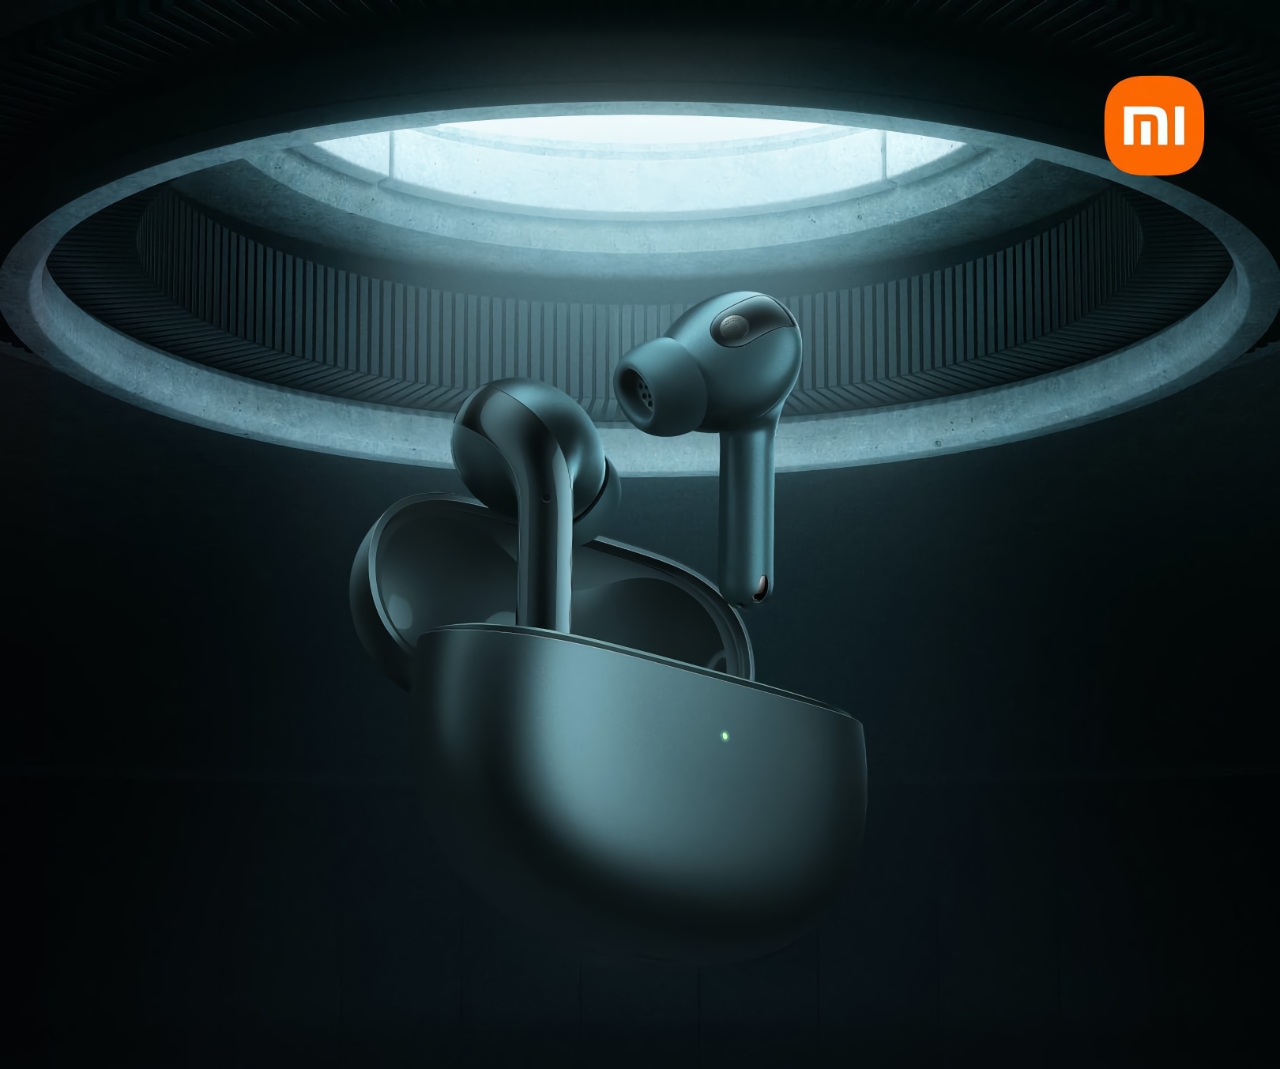 Xiaomi will unveil new TWS headphones with ANC on September 27, they will be very similar to FlipBuds Pro